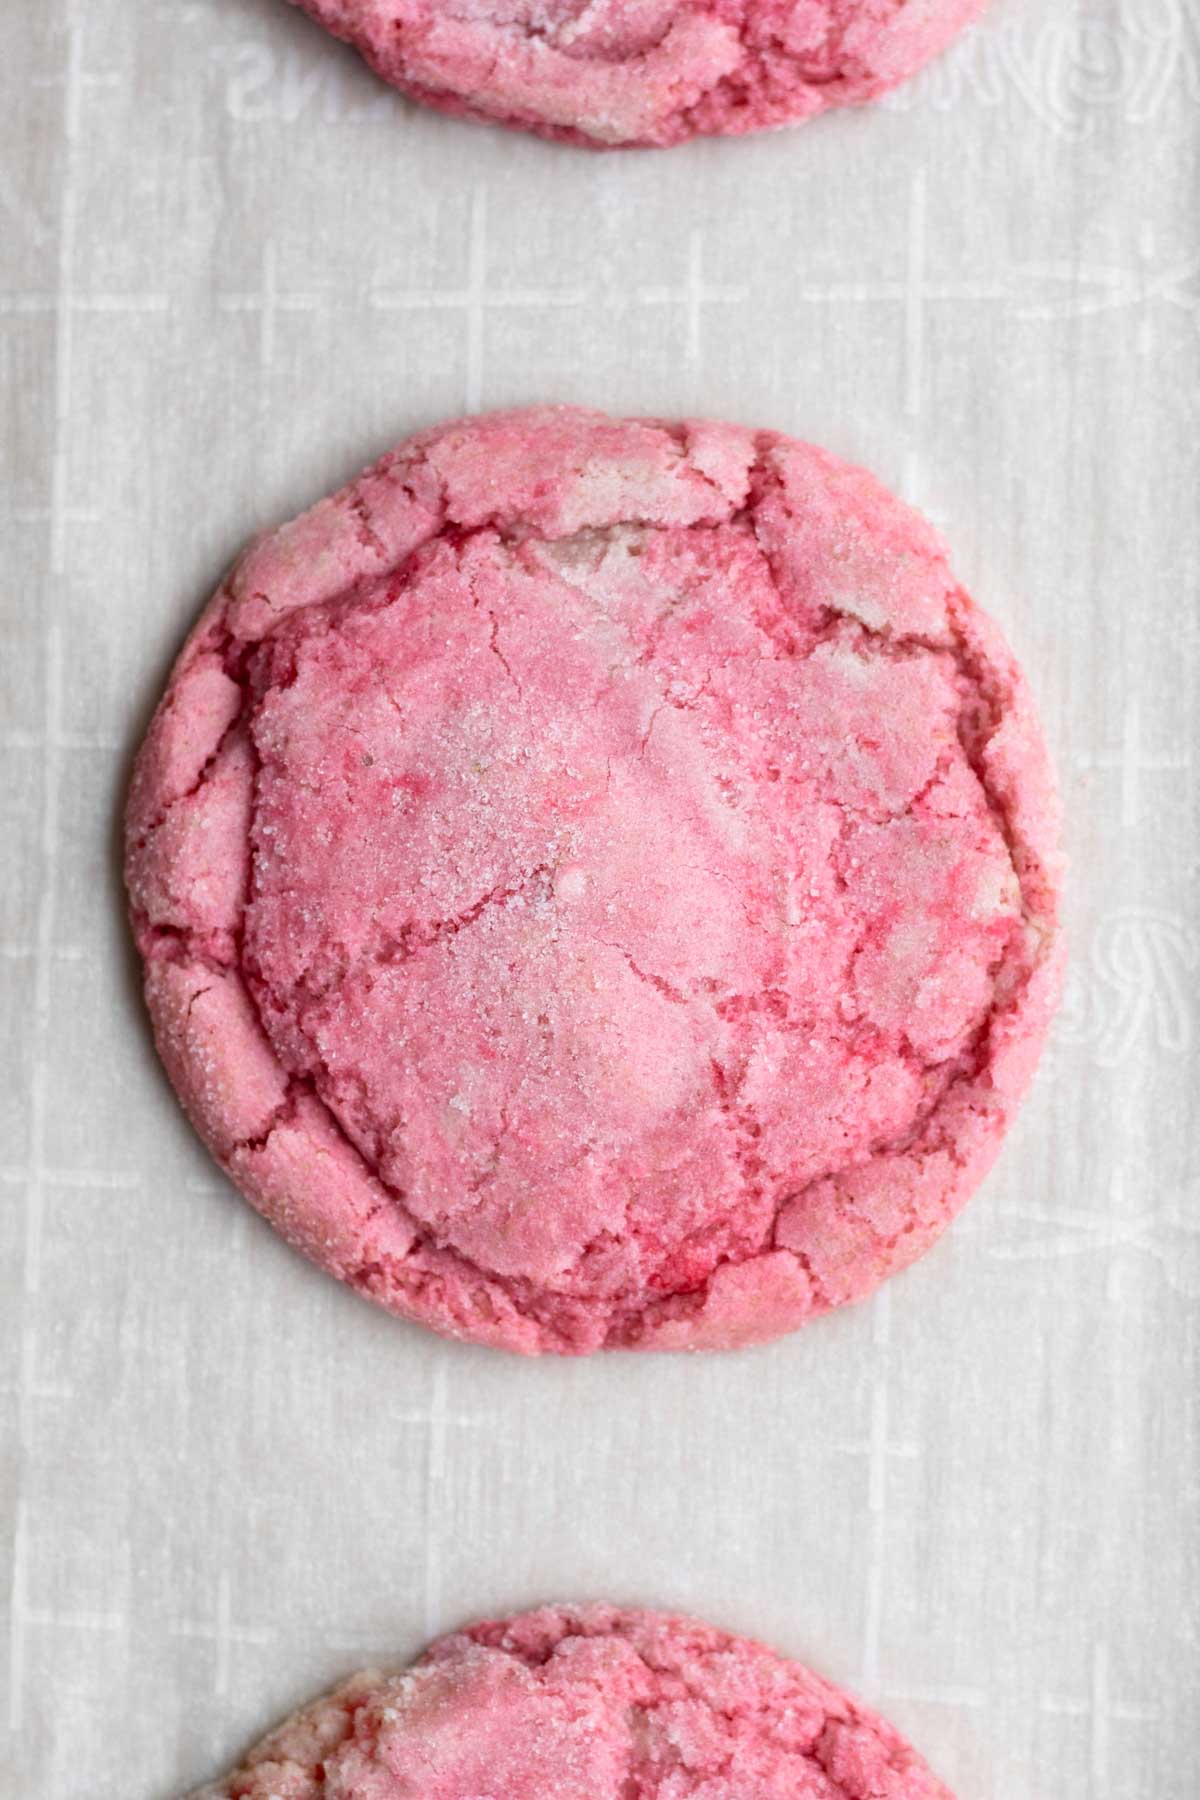 A warm Strawberry Sugar Cookie from the oven on parchment paper.